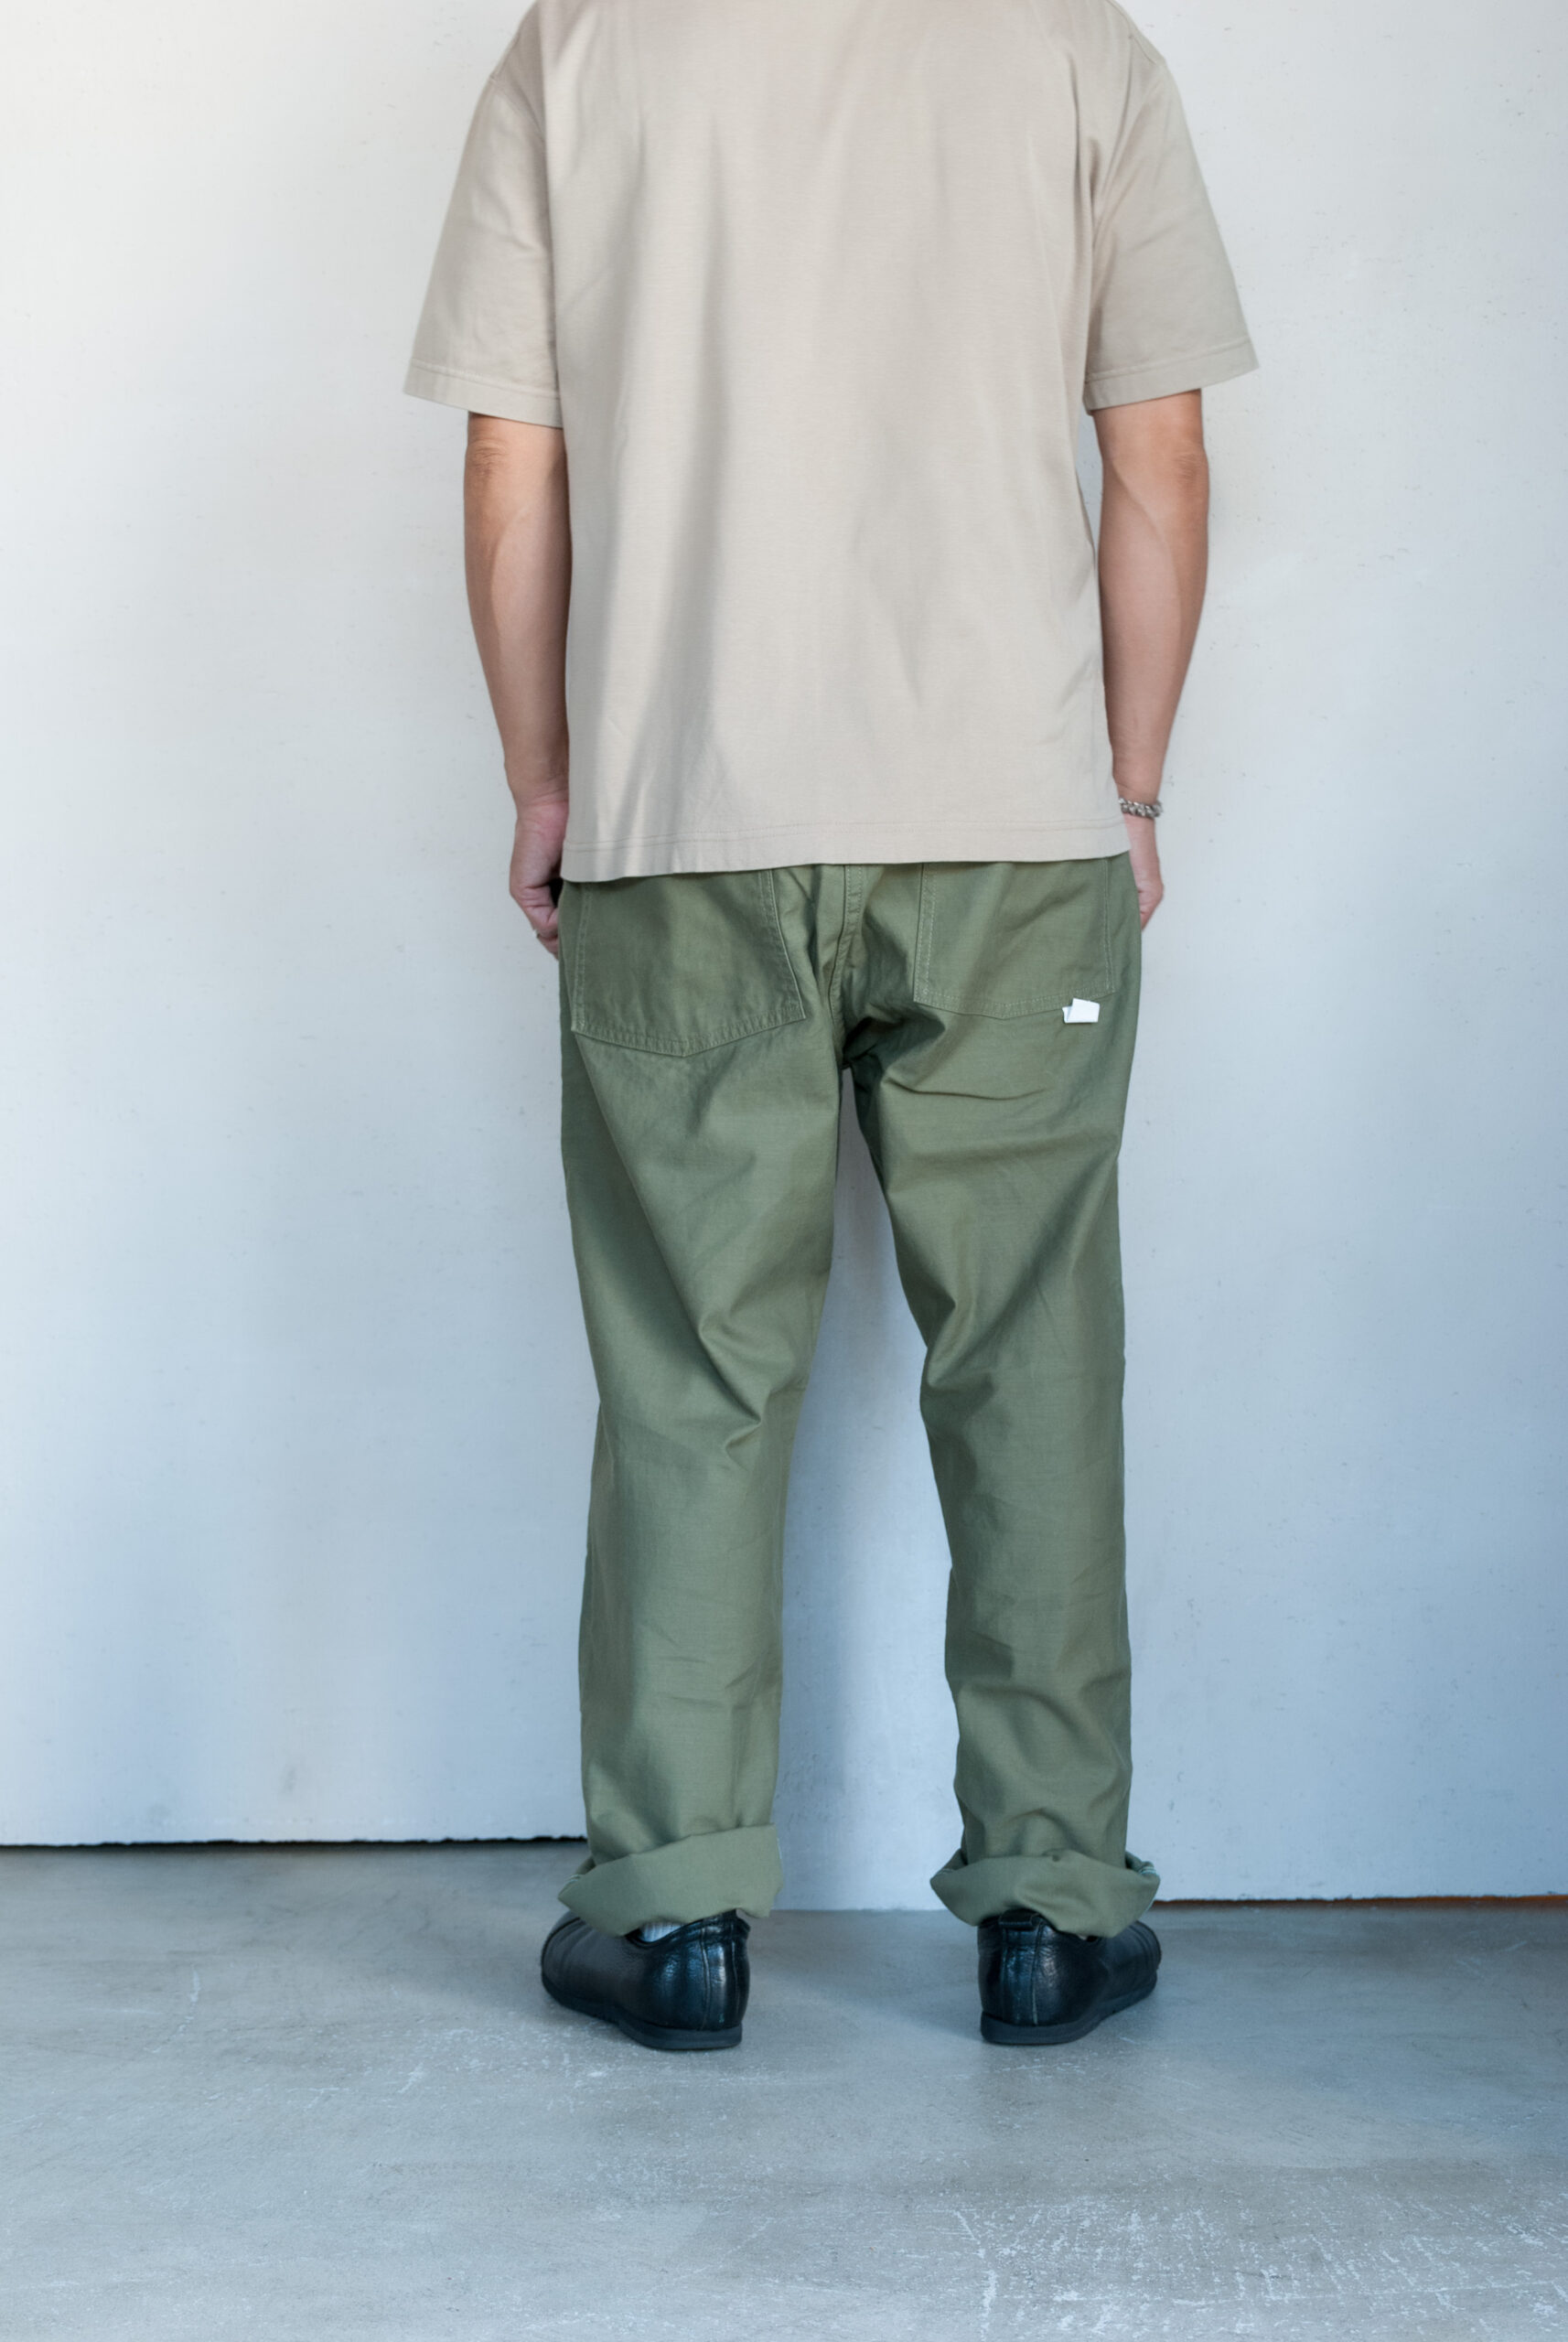 Post O’Alls Army Pants Vintage Sateen Olive